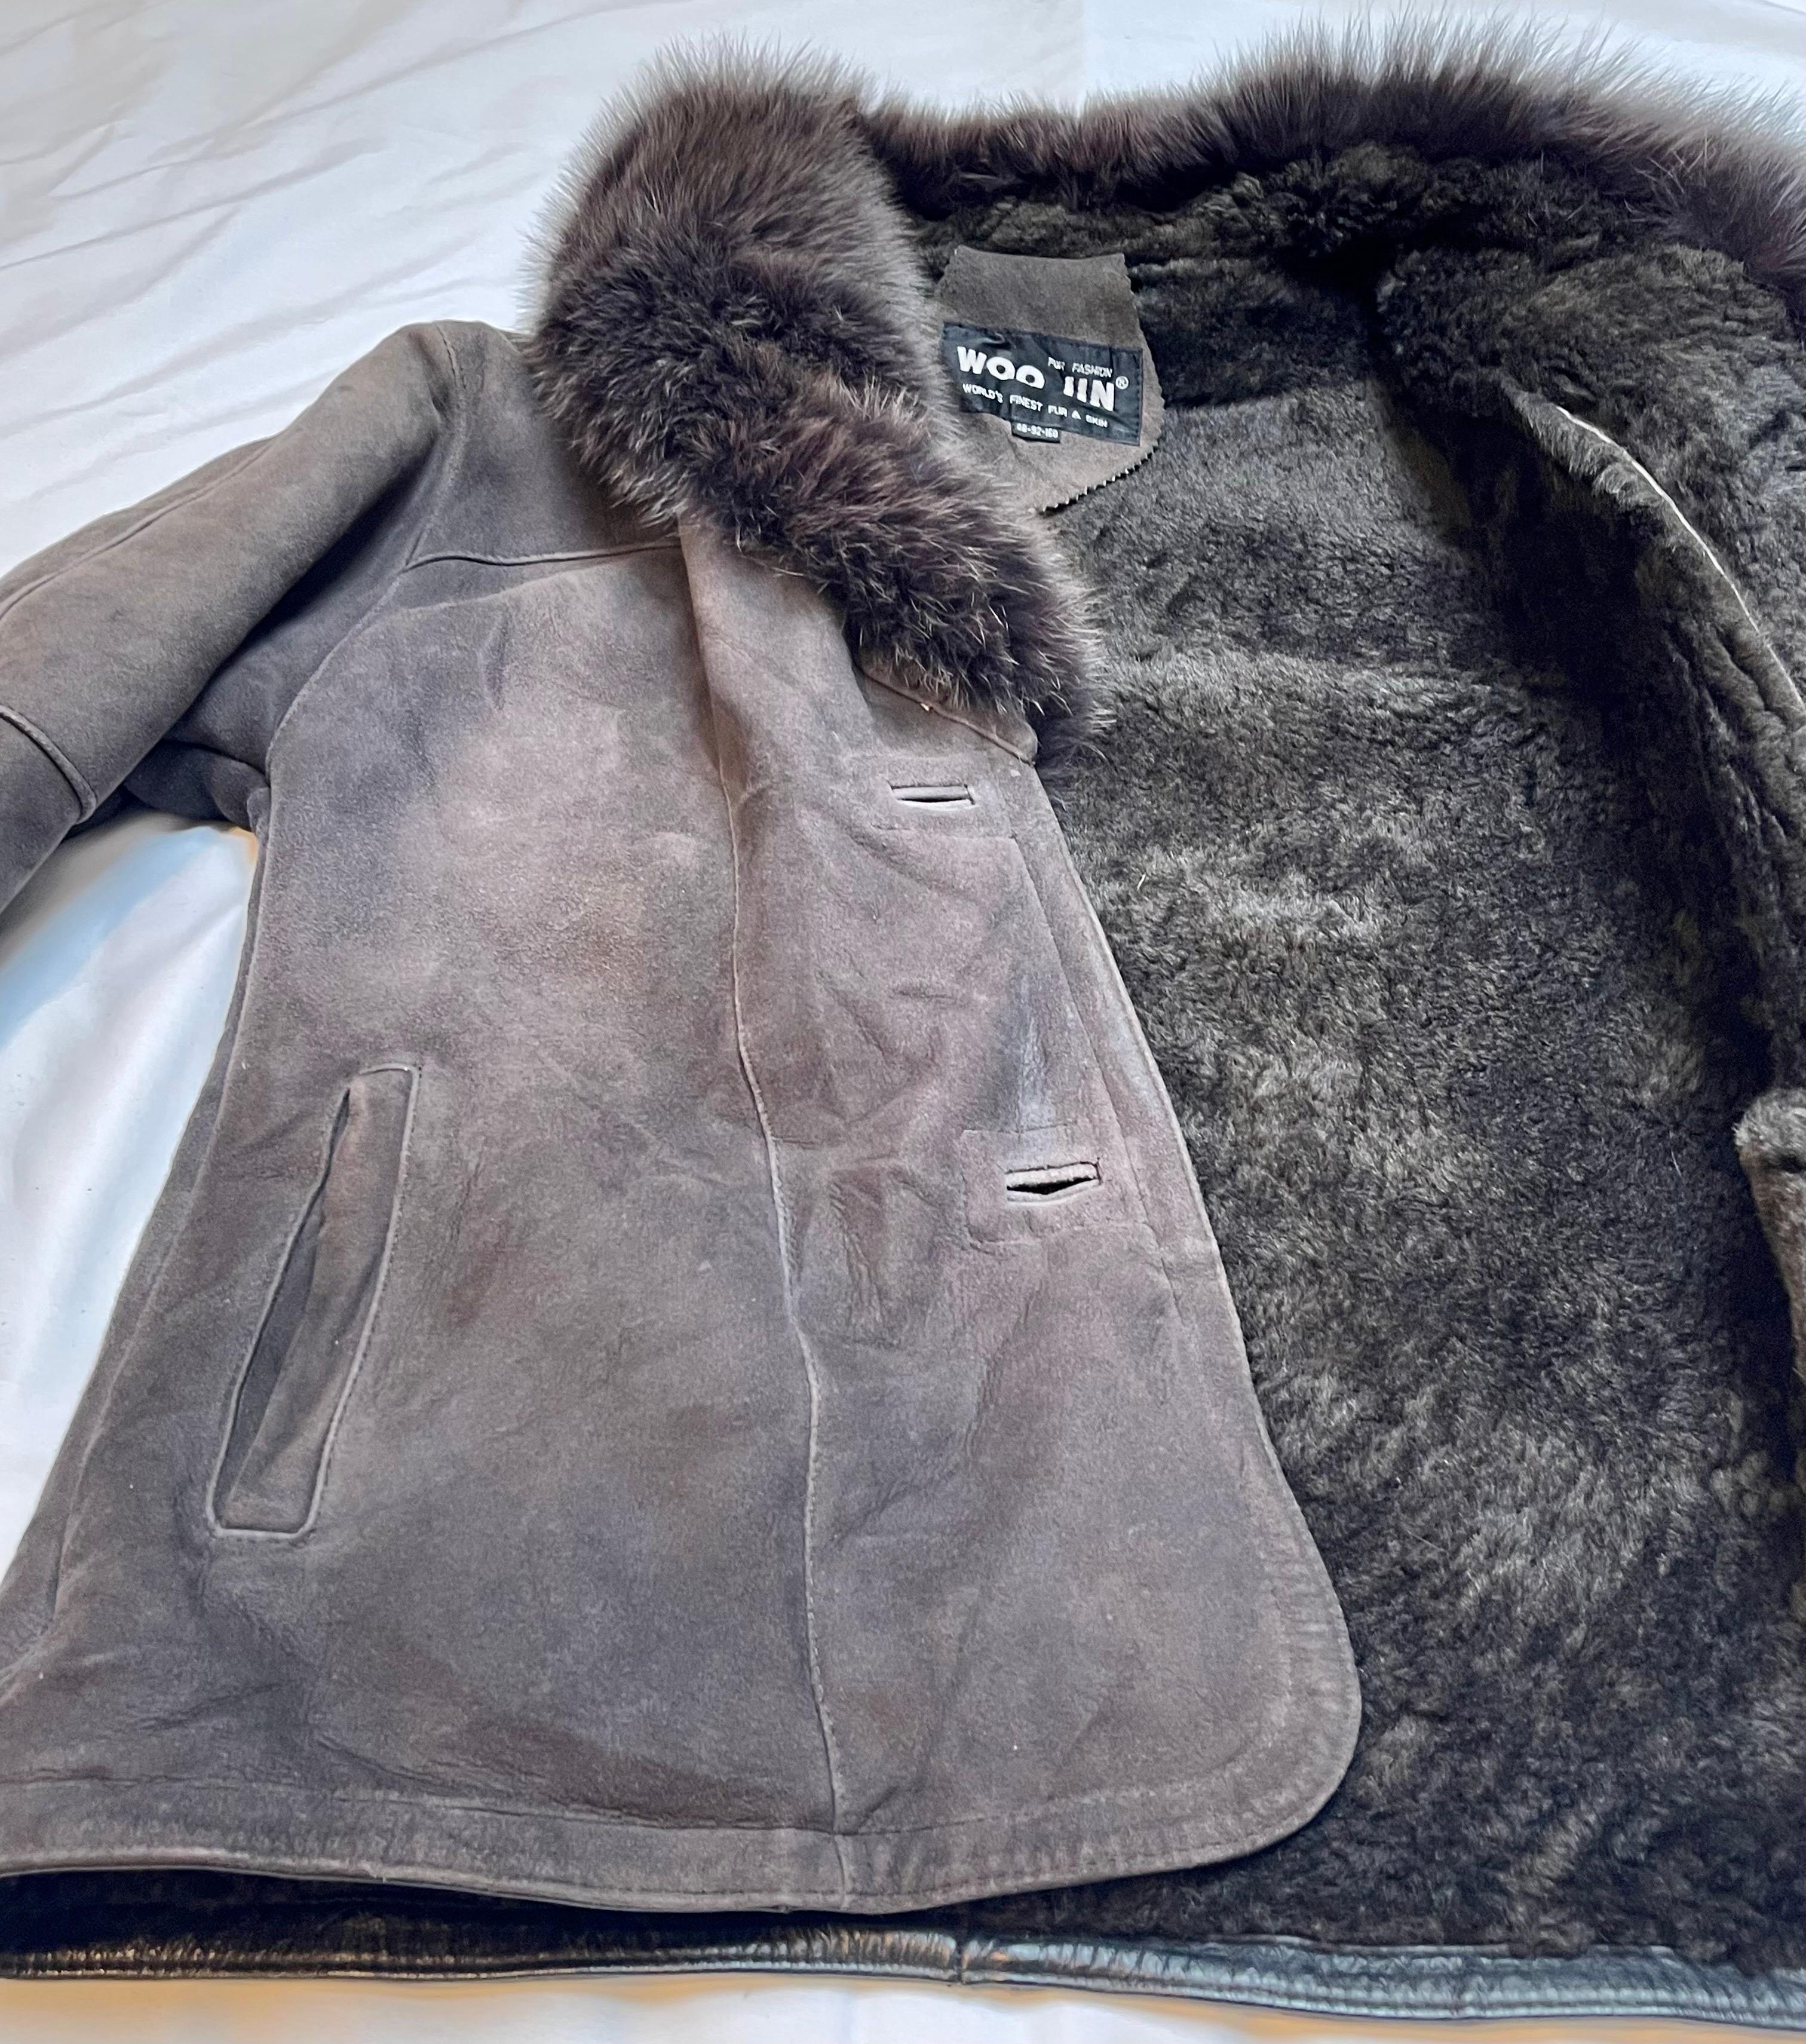  Winter ·  Genuine Fur · Genuine Leather · Shearling · Casual · Bomber, Real Fur
Super-insulating extra fine quality 
almost new ! super excellent condition
Tag Reads Woo Jin
World's Finest Fur and Skin
Size 88-92-160
25 inch long 
20 Inch wide at